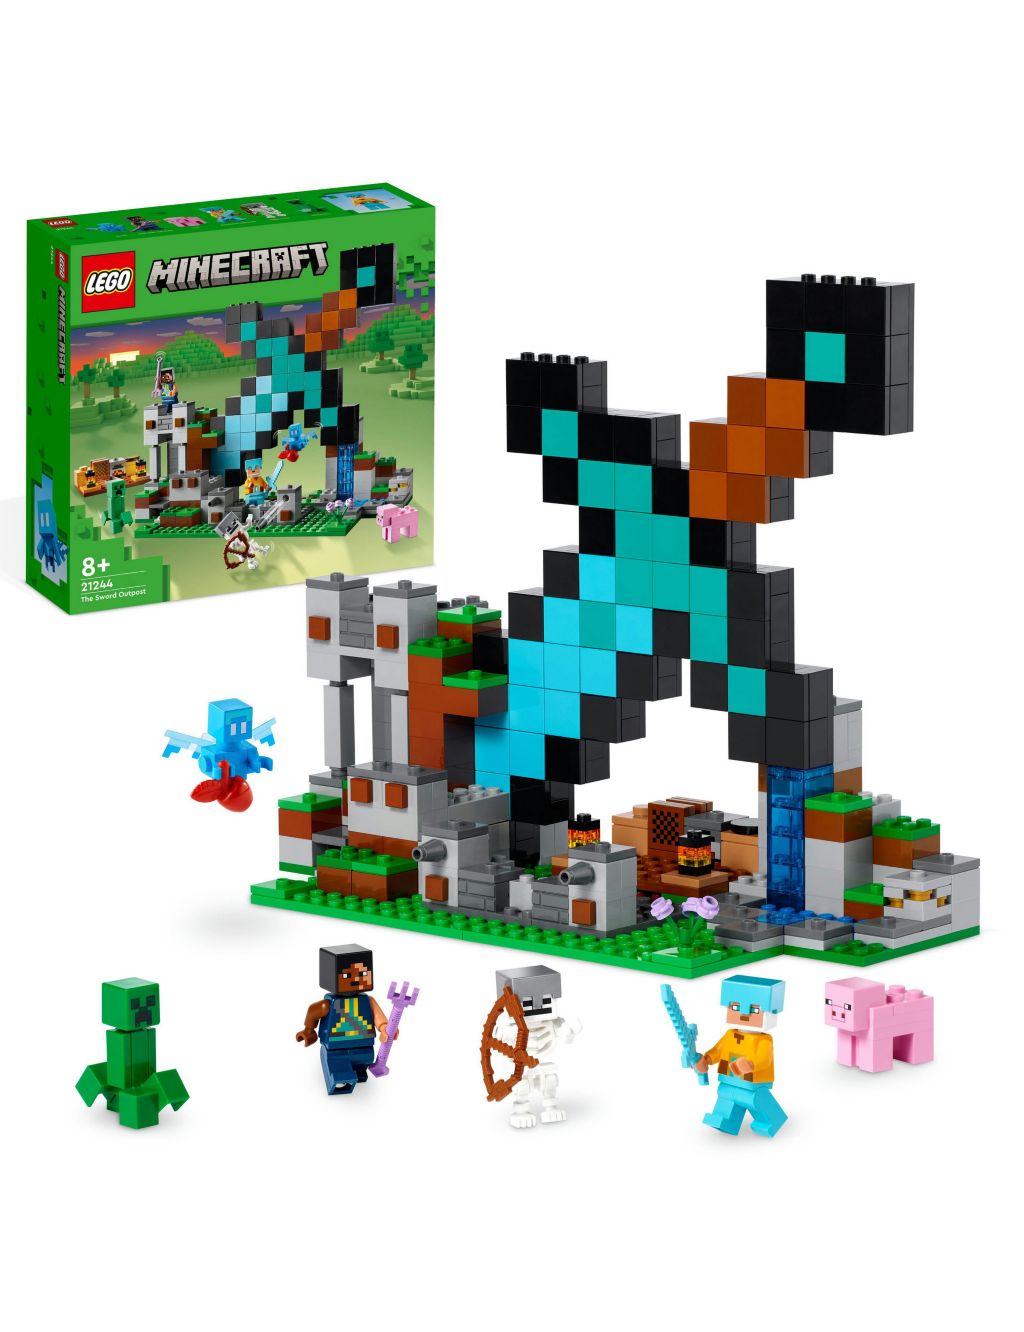 LEGO Minecraft The Sword Outpost Building Toy (8+ Yrs)